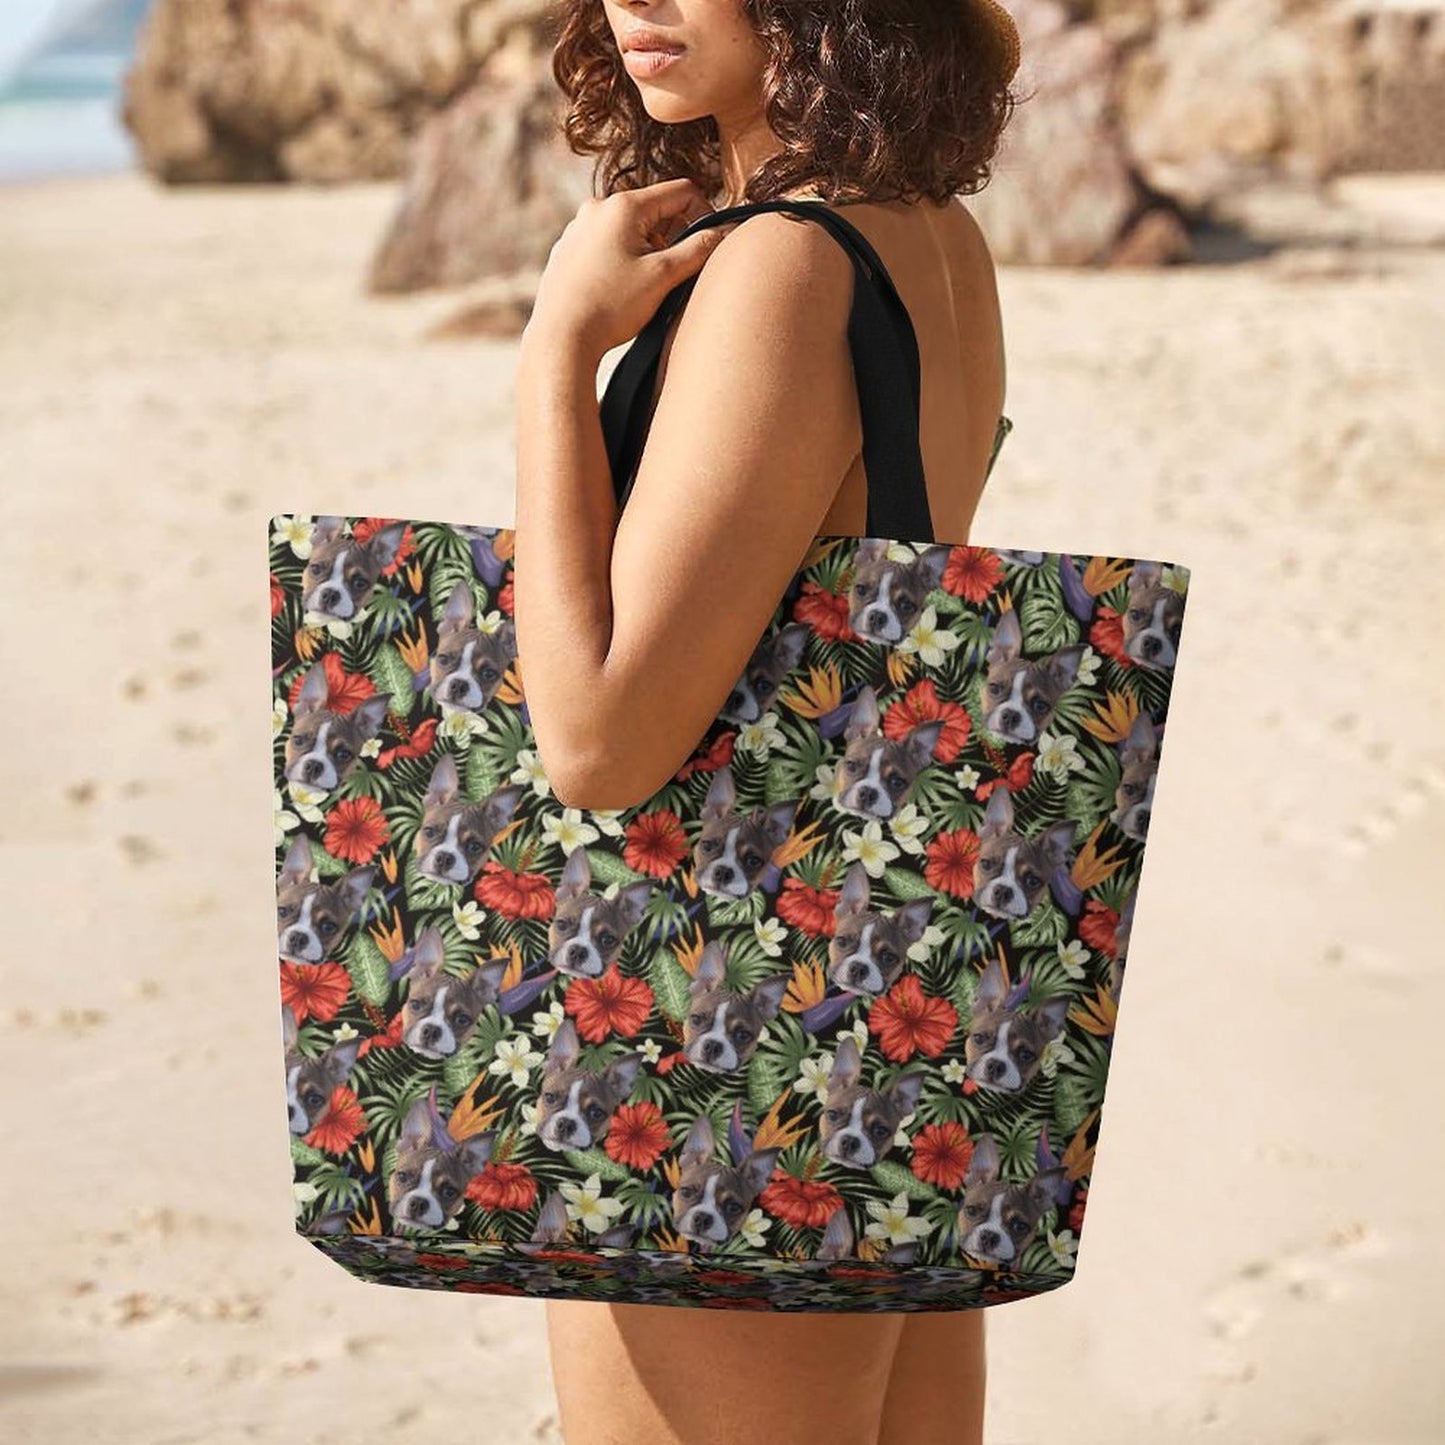 HAWAIIAN STYLE FACE - Large One Shoulder Shopping Bag